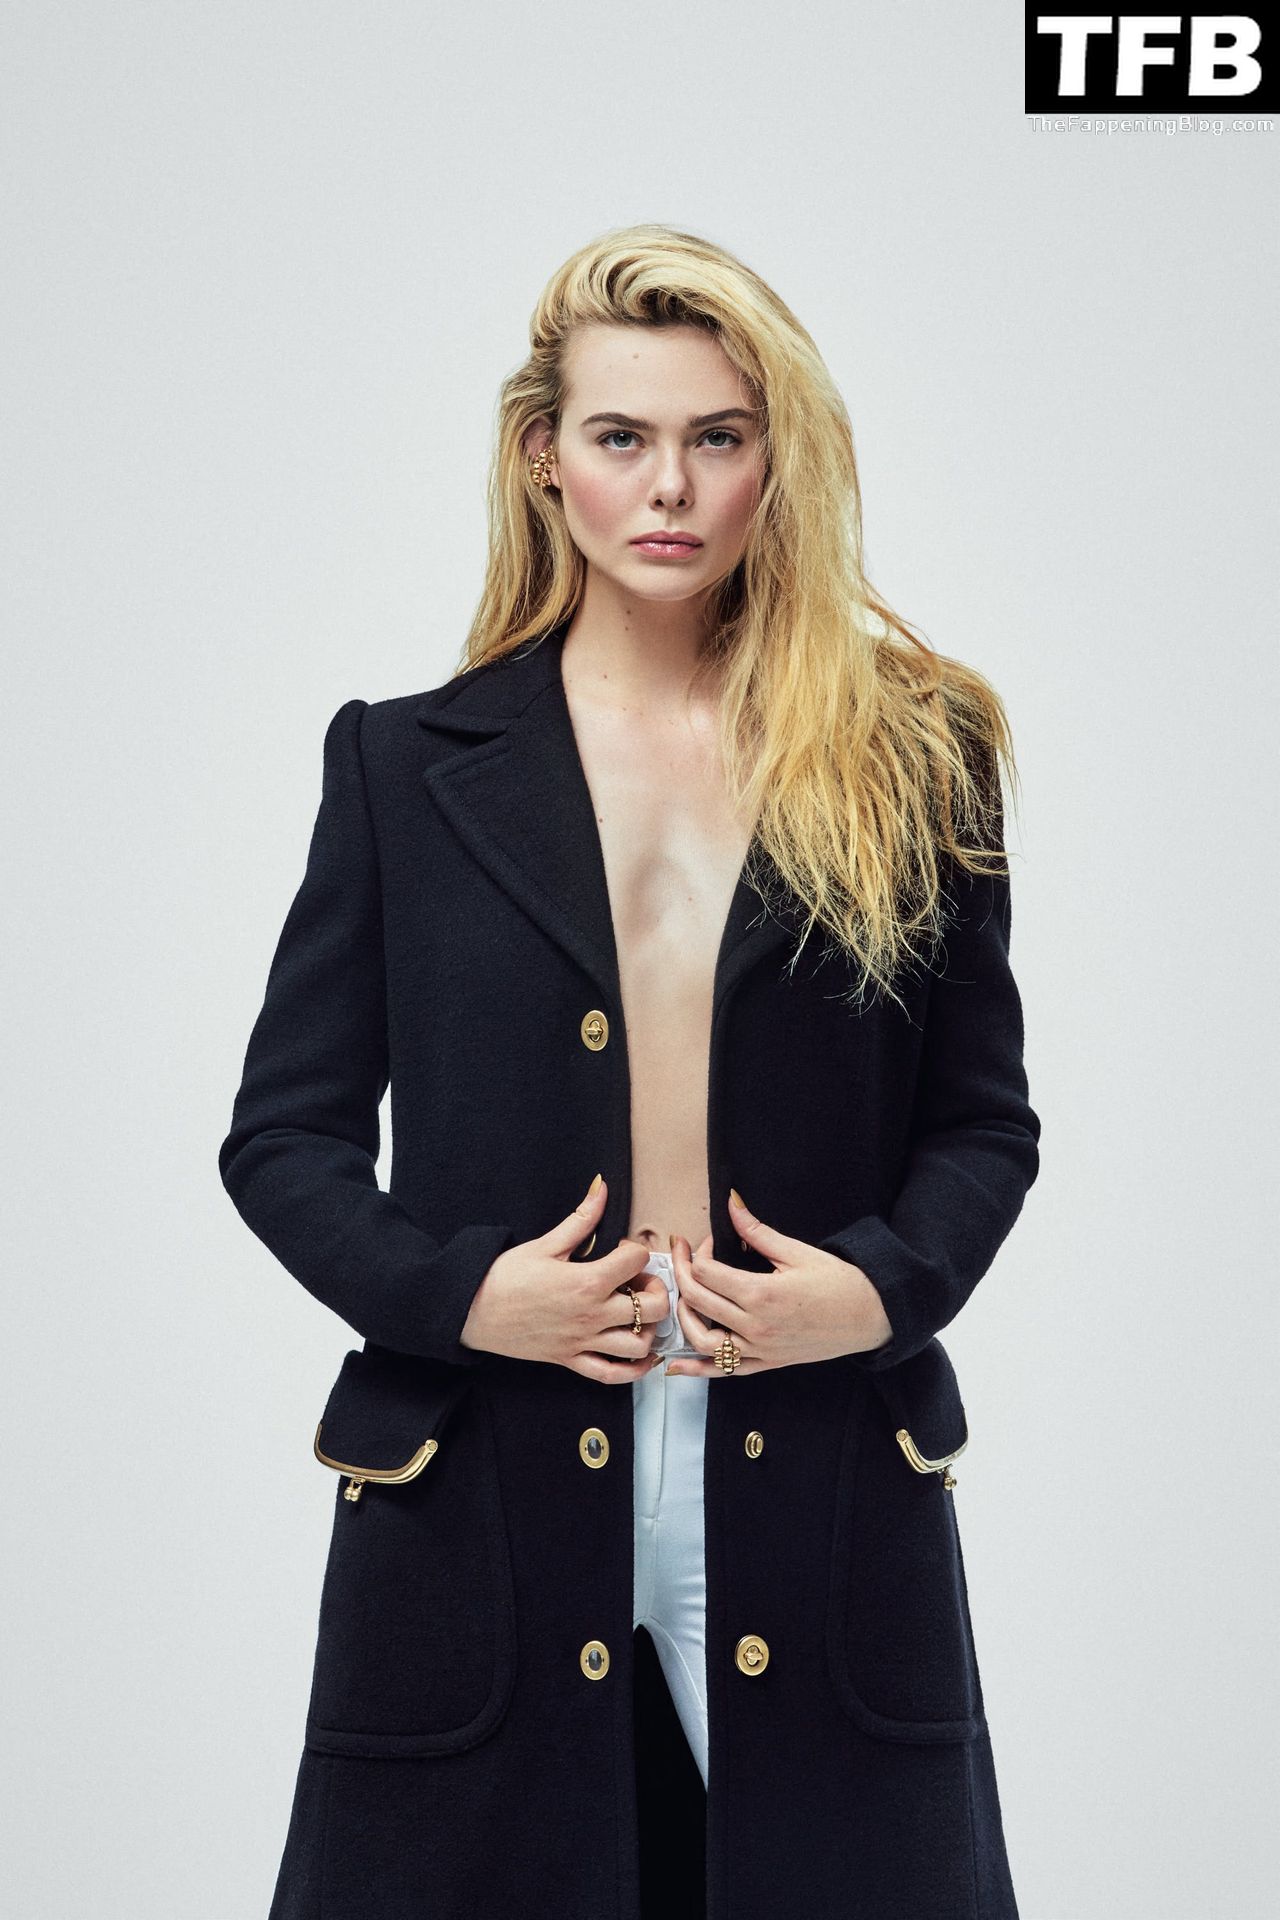 Elle-Fanning-Sexy-The-Fappening-Blog-6.jpg